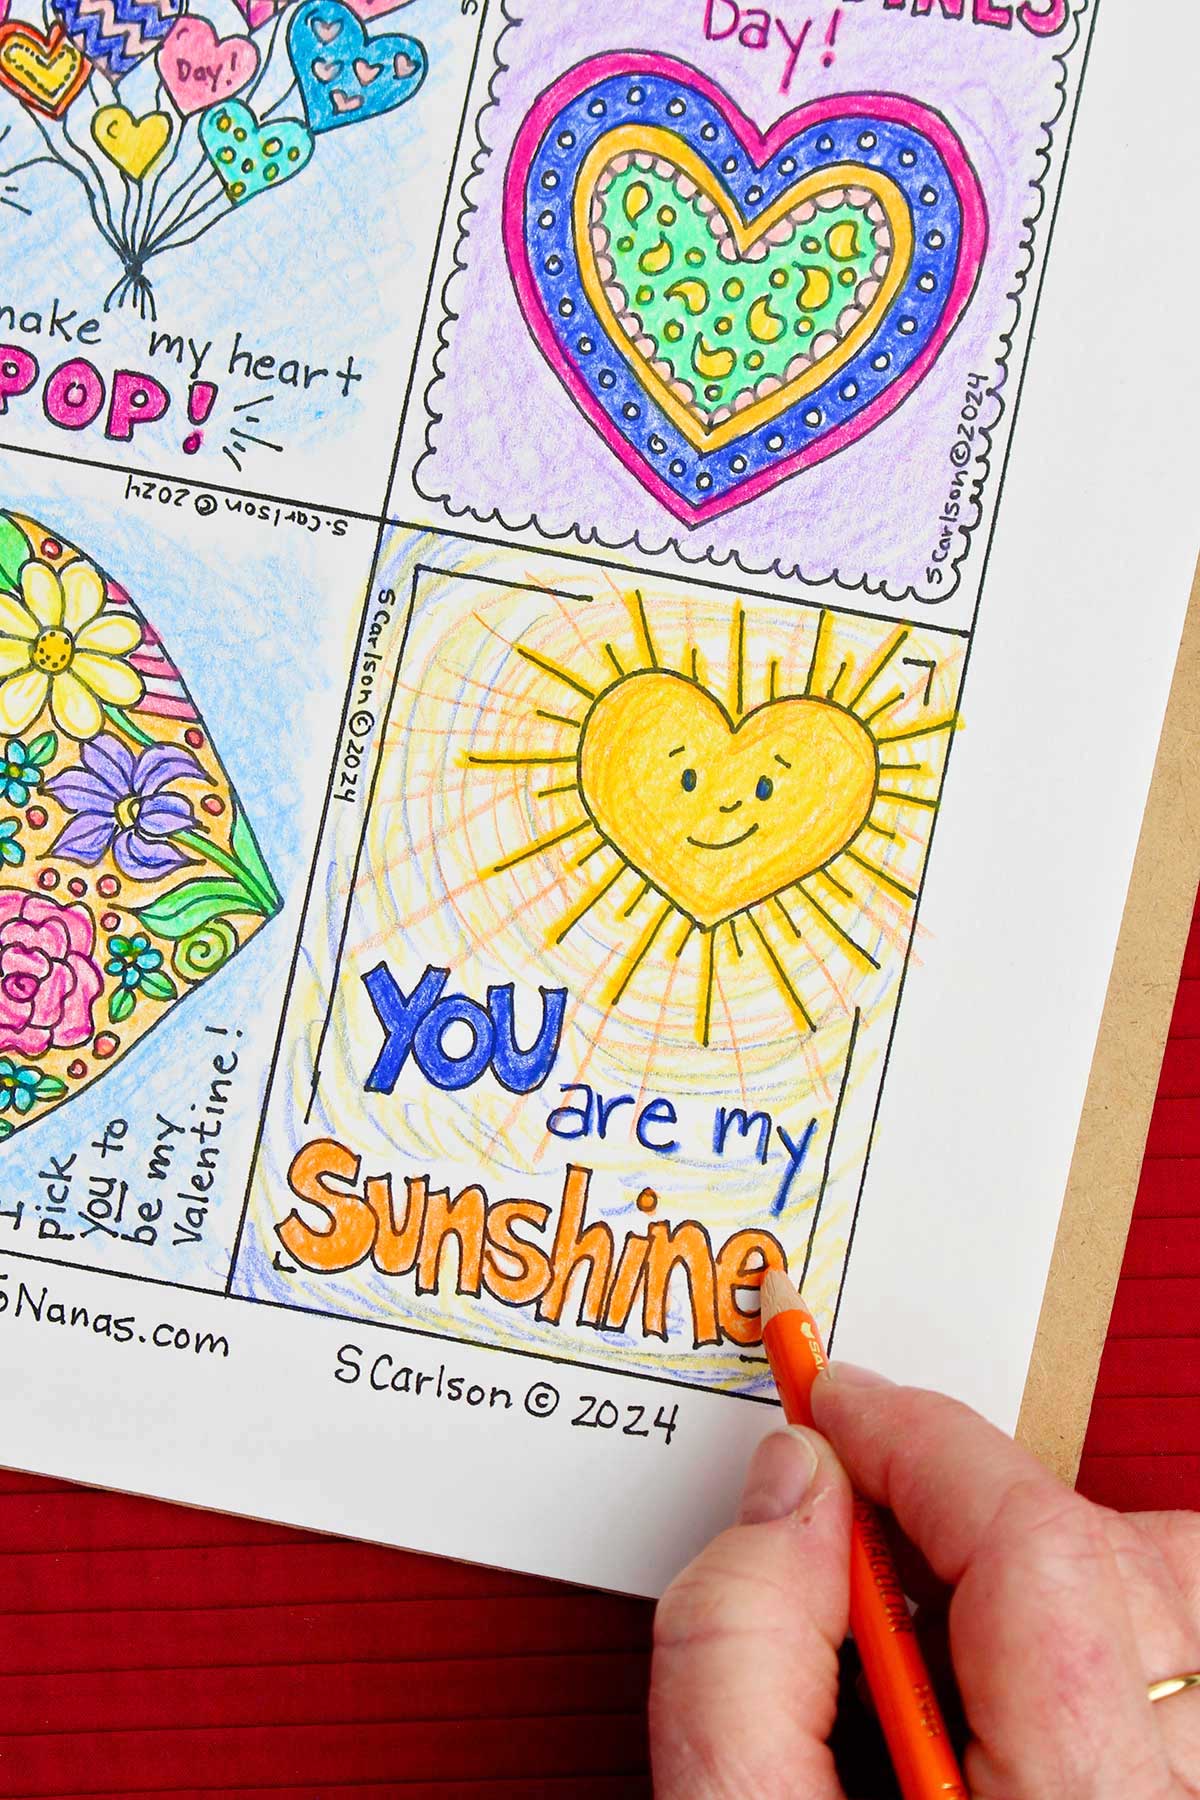 Hand using orange color pencil to shade in the word "sunshine" on Valentine of a heart shaped sun saying "You are my sunshine".